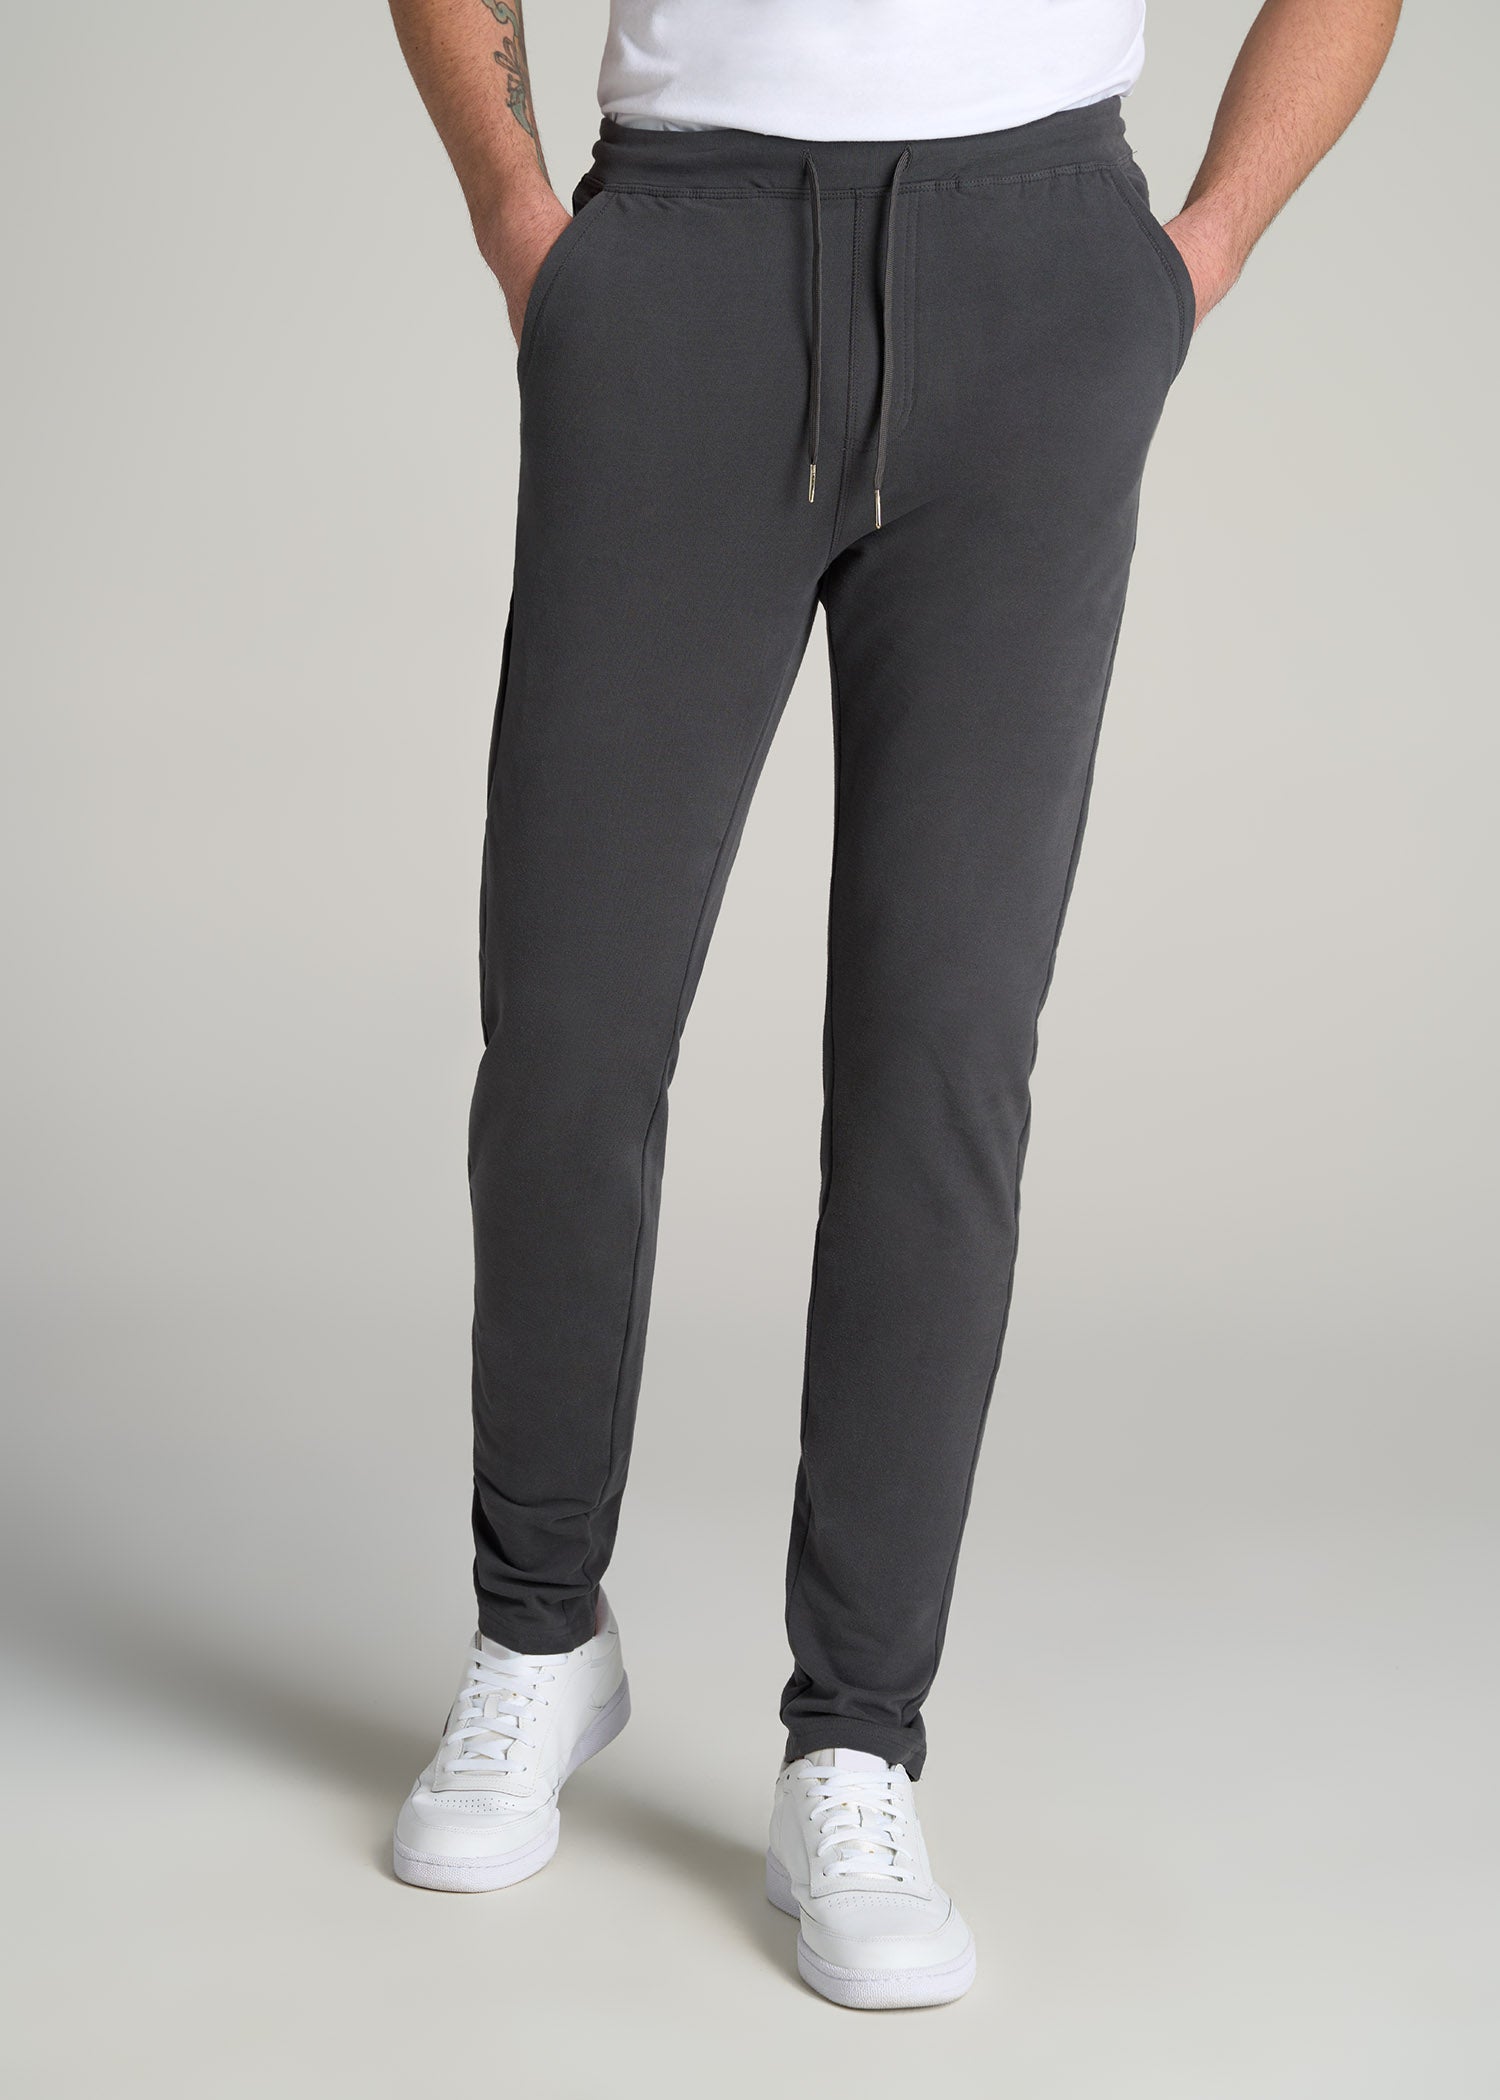 Mens Tall Microsanded French Terry Sweatpant Iron Grey – American Tall